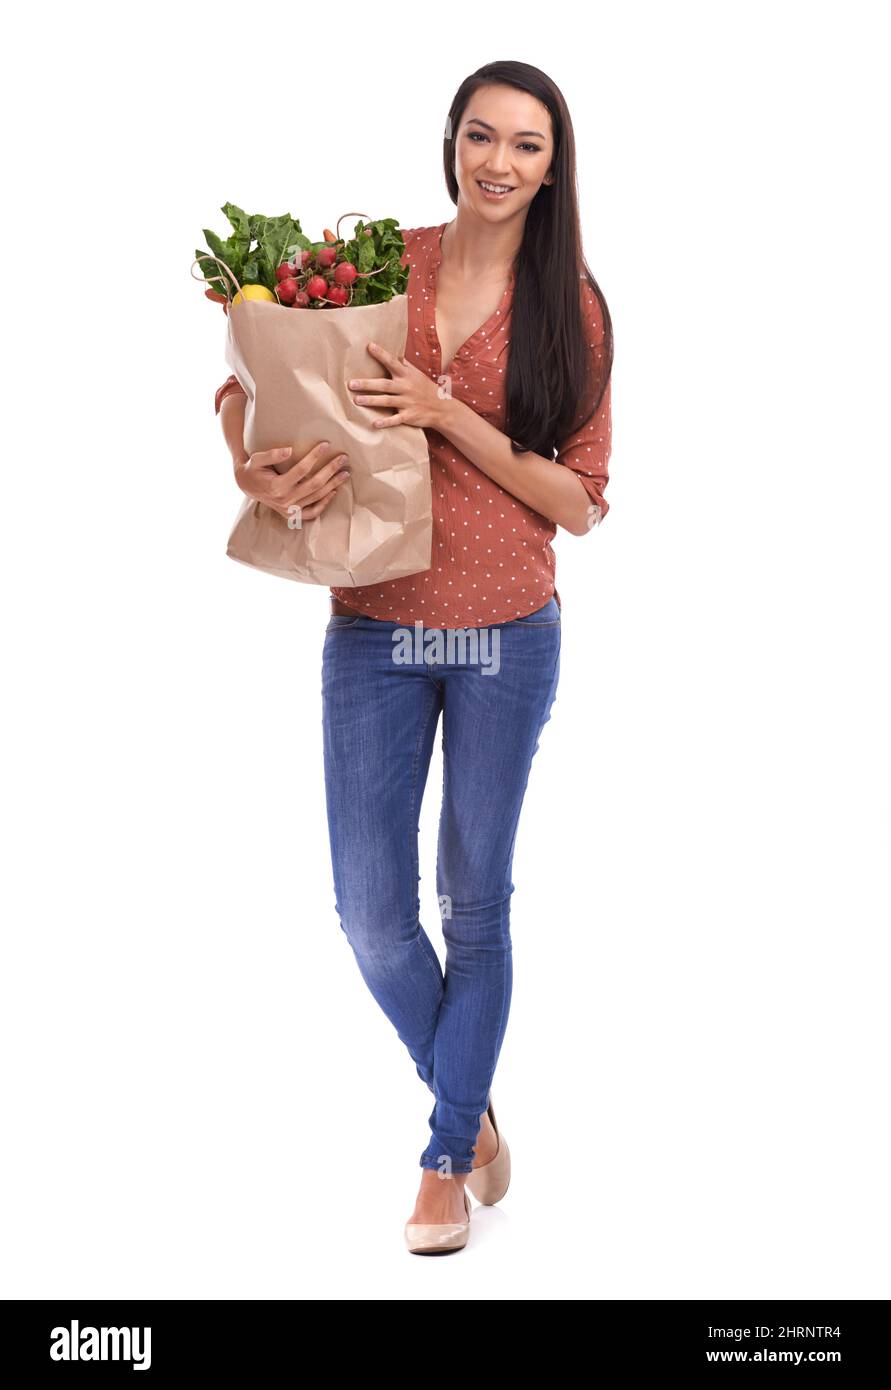 Thats my grocery shopping done. Studio shot of a young woman carrying a bag of groceries isolated on white. Stock Photo